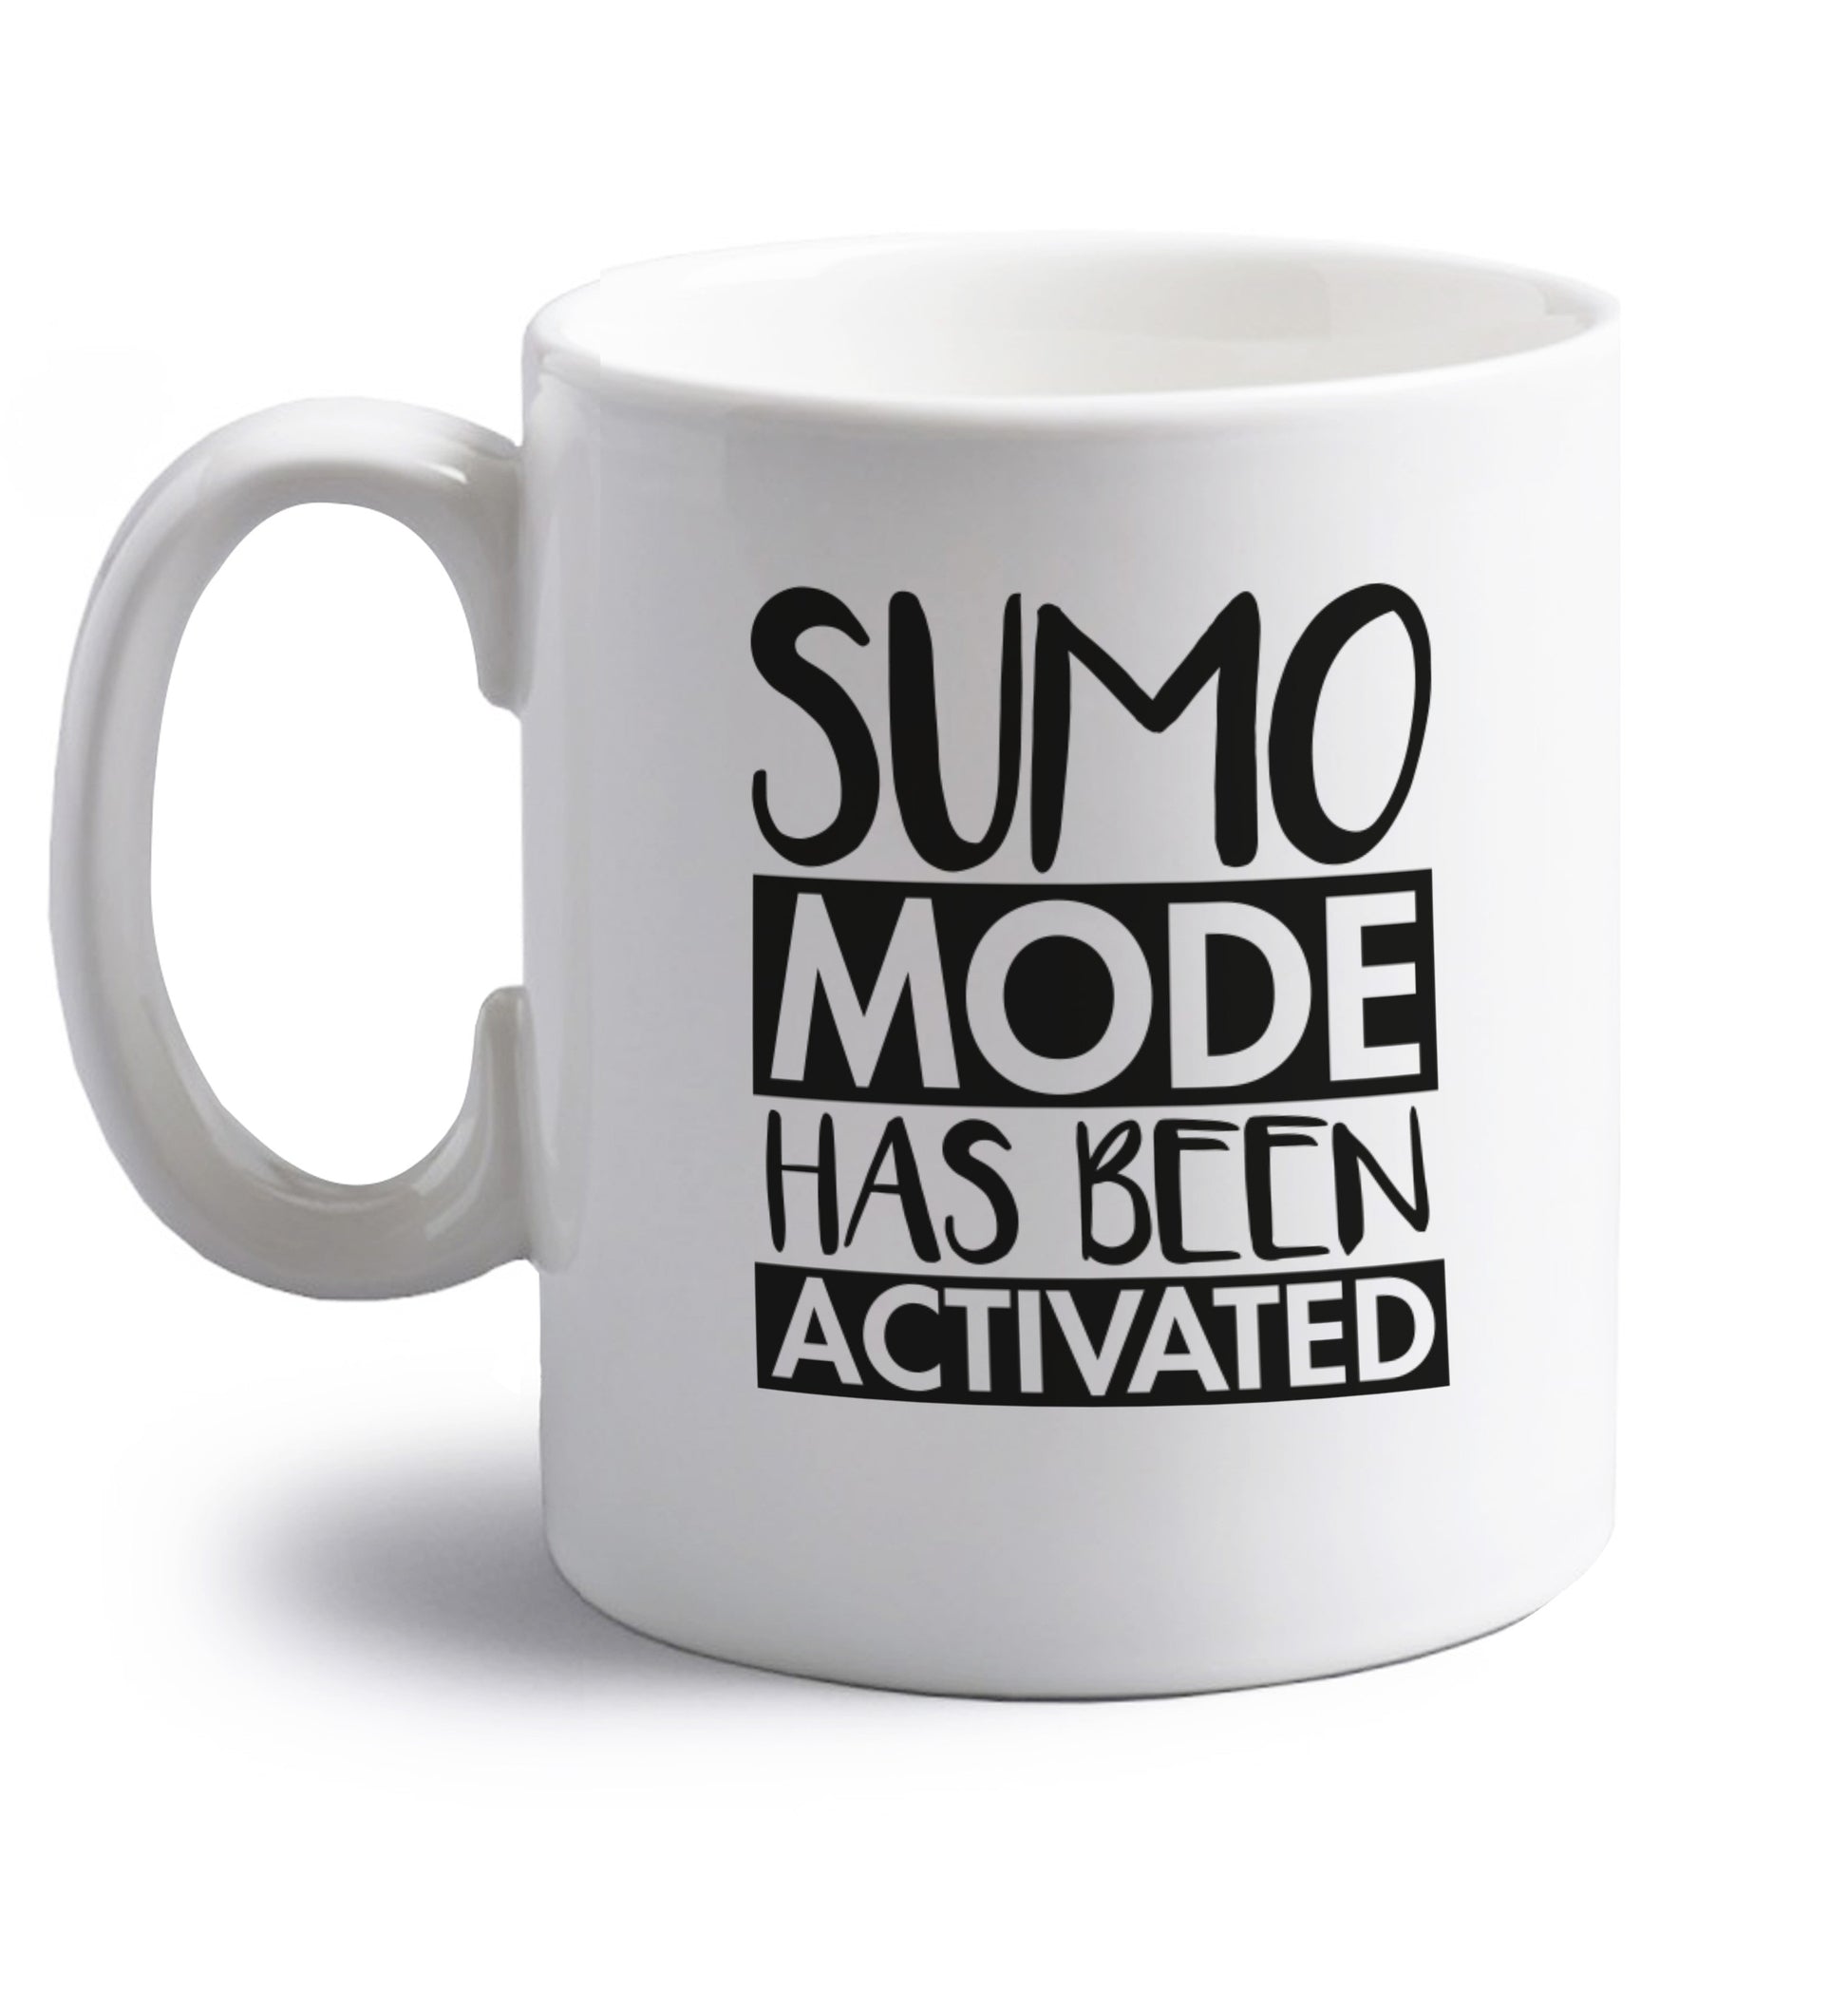 Sumo mode activated right handed white ceramic mug 